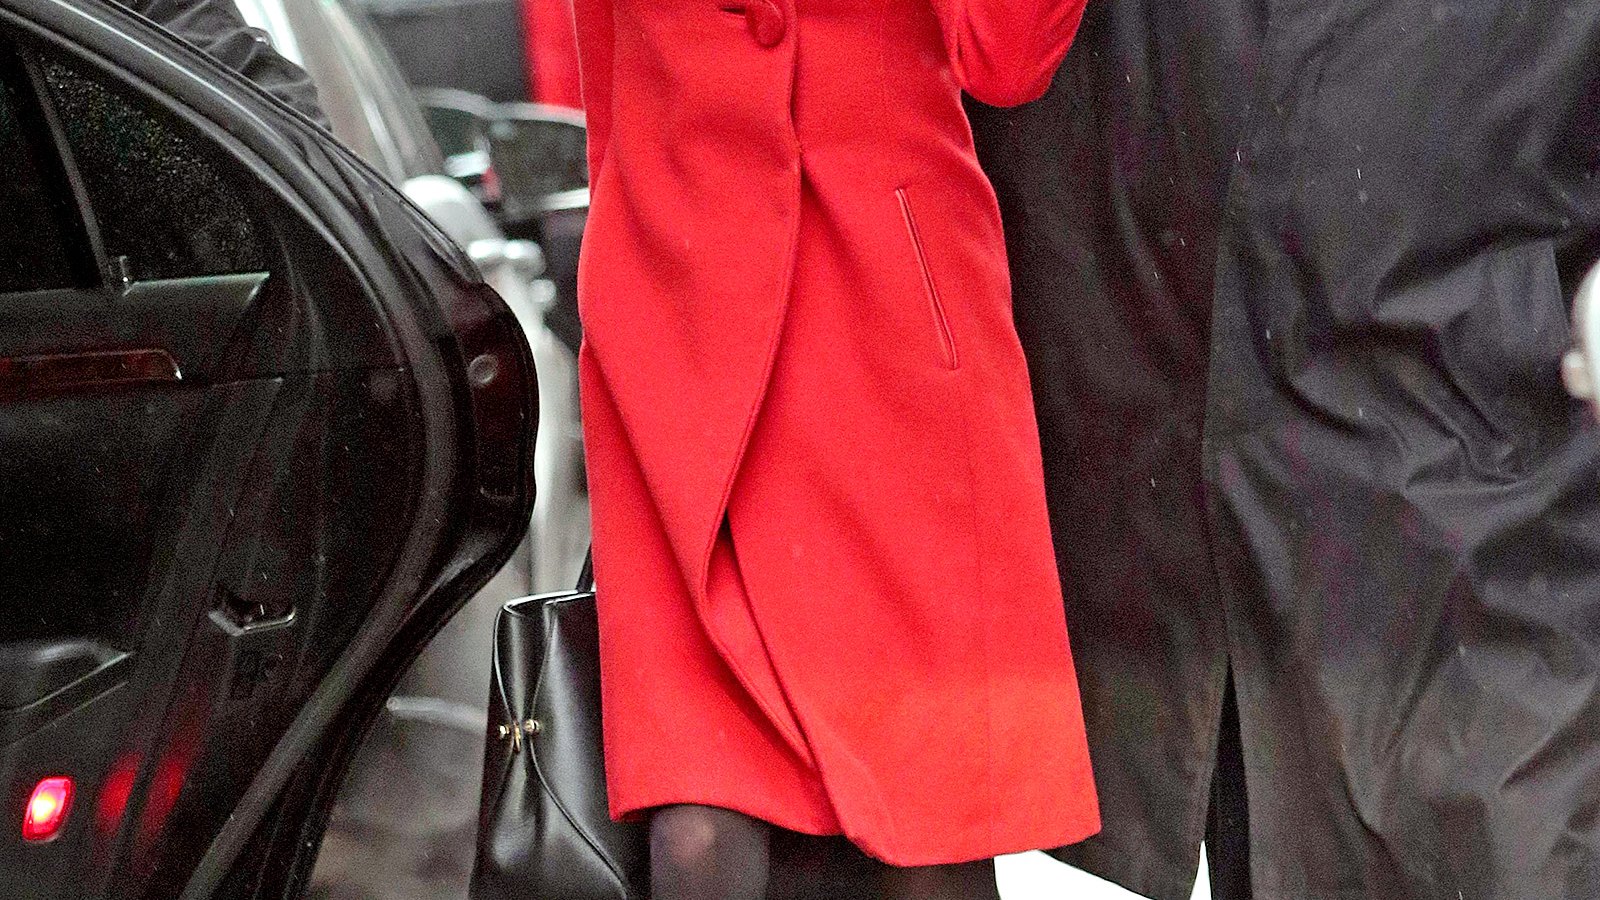 Amal Alamuddin in a red coat during a snow story in NYC on March 5.